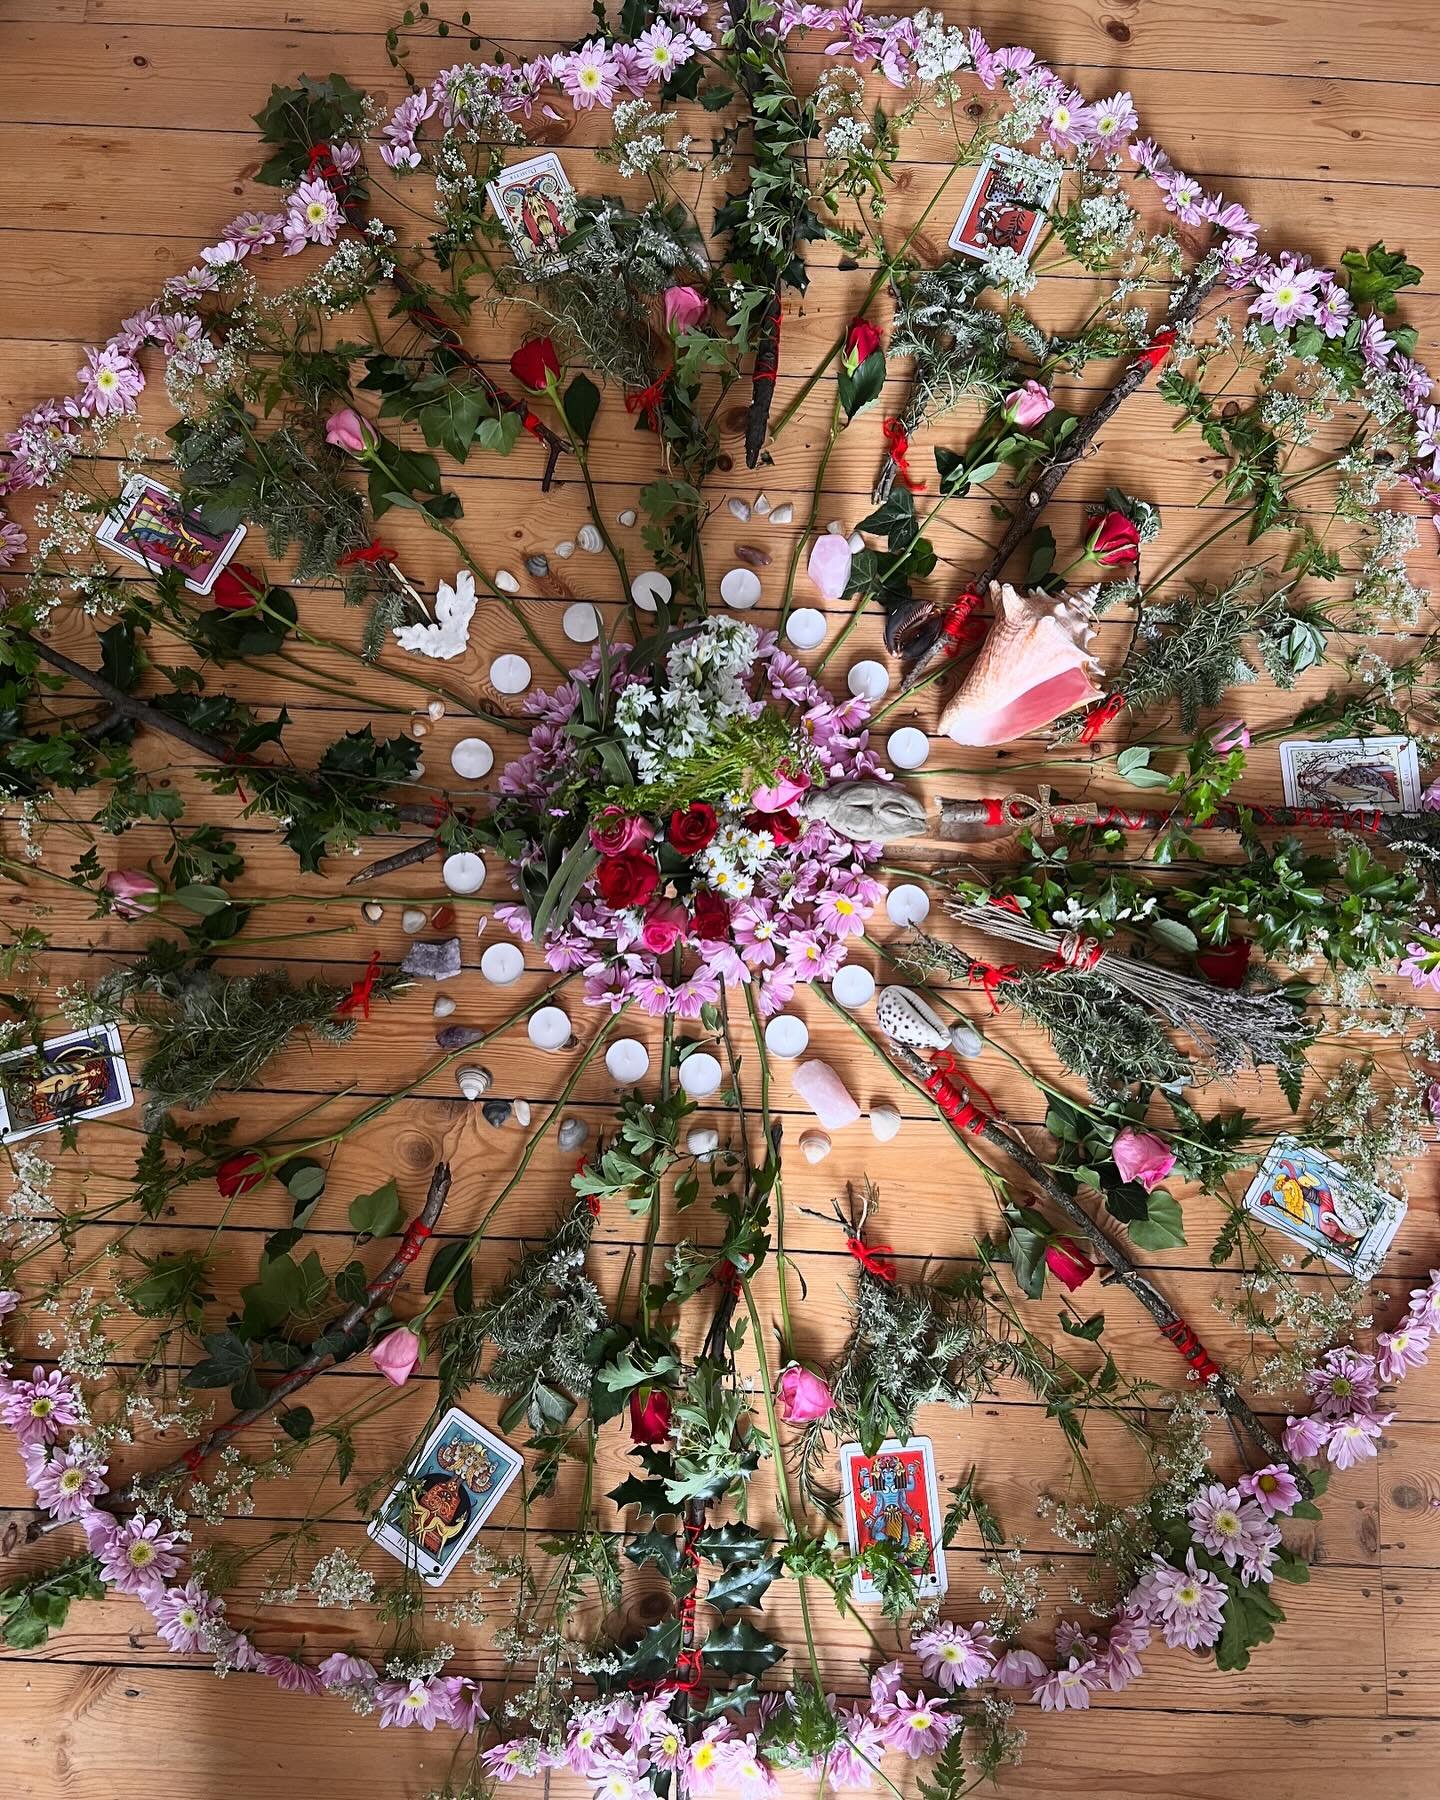 Beltane blessings of fertility, beauty and magic to you on this May Day!
.
Celebrating this beautiful Goddess mama @islandgirlinprint who we crowned in May blossom at the weekend with a circle of sisters, Cacao, prayers, intentions, red thread, so ma